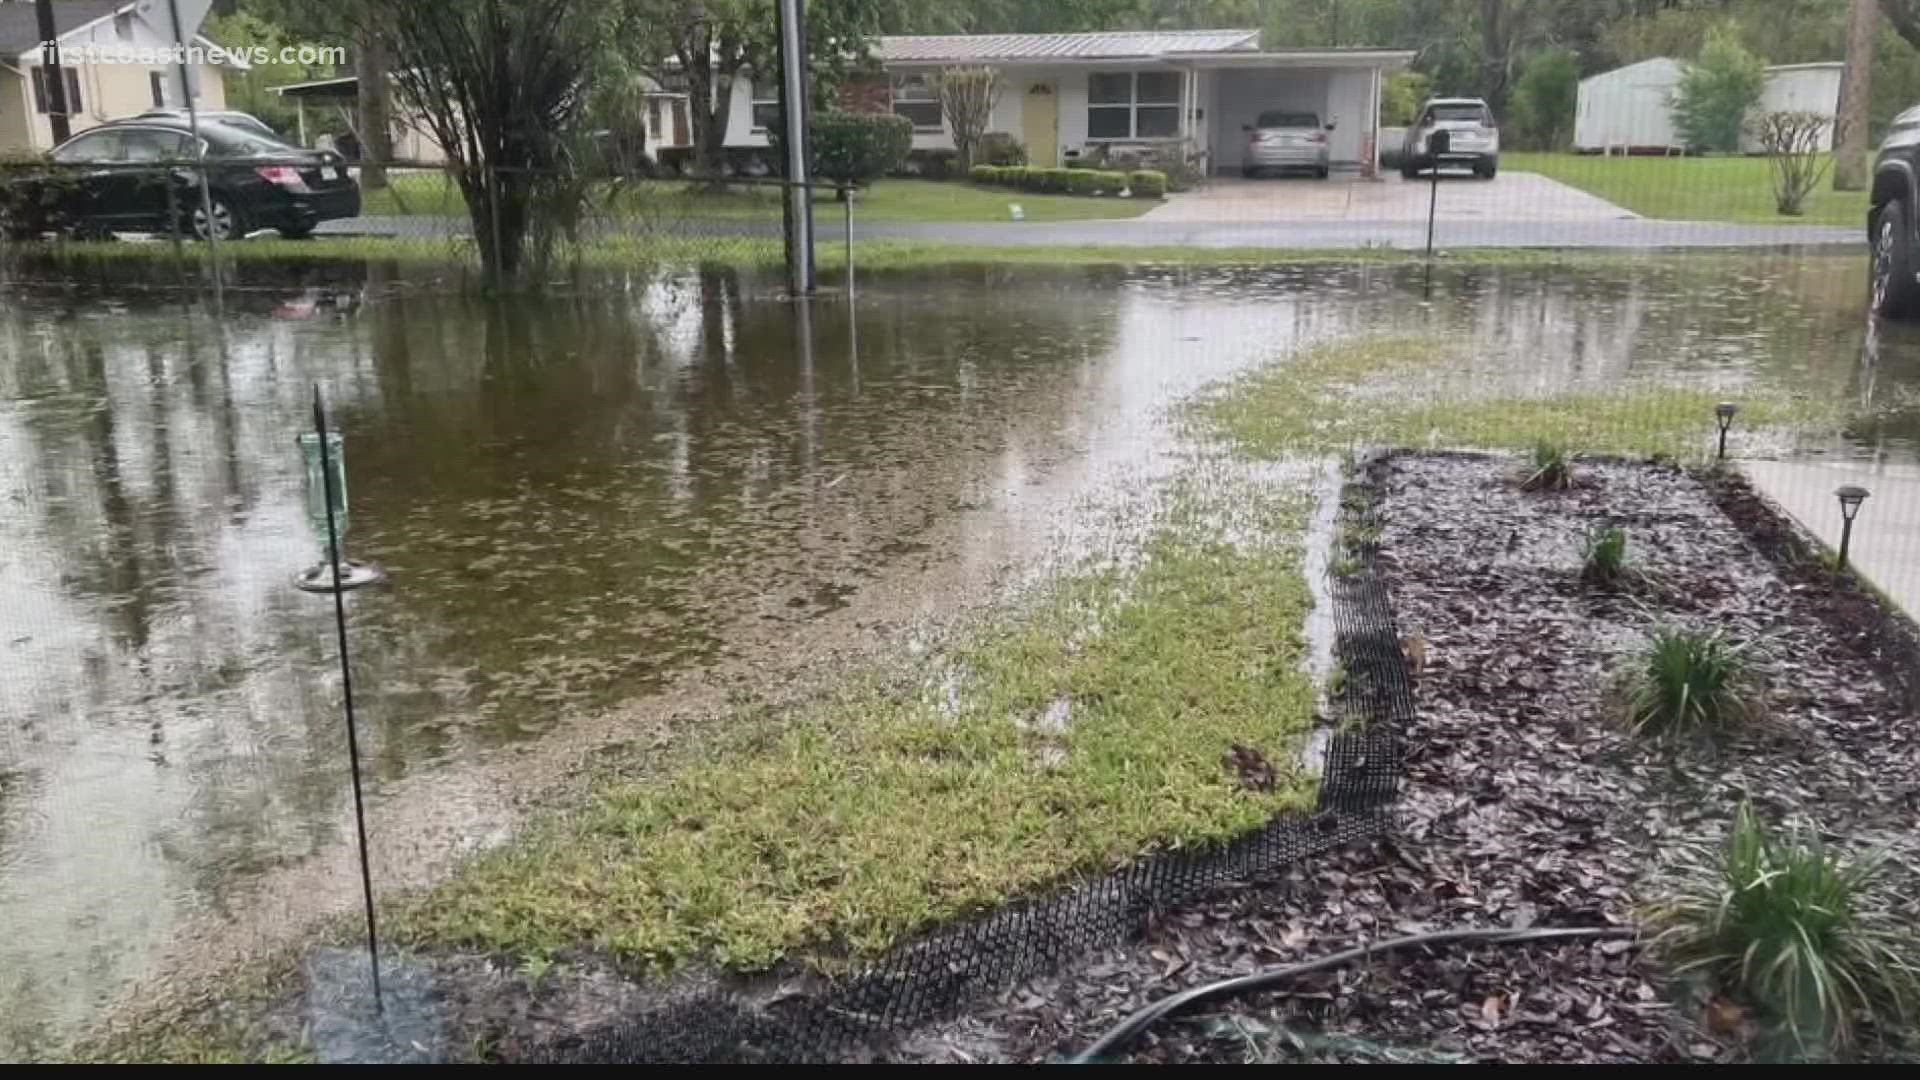 Every time it rains in Murray Hill, the driveway and front yard become a pond. City officials say the newly constructed house did not address drainage issues.